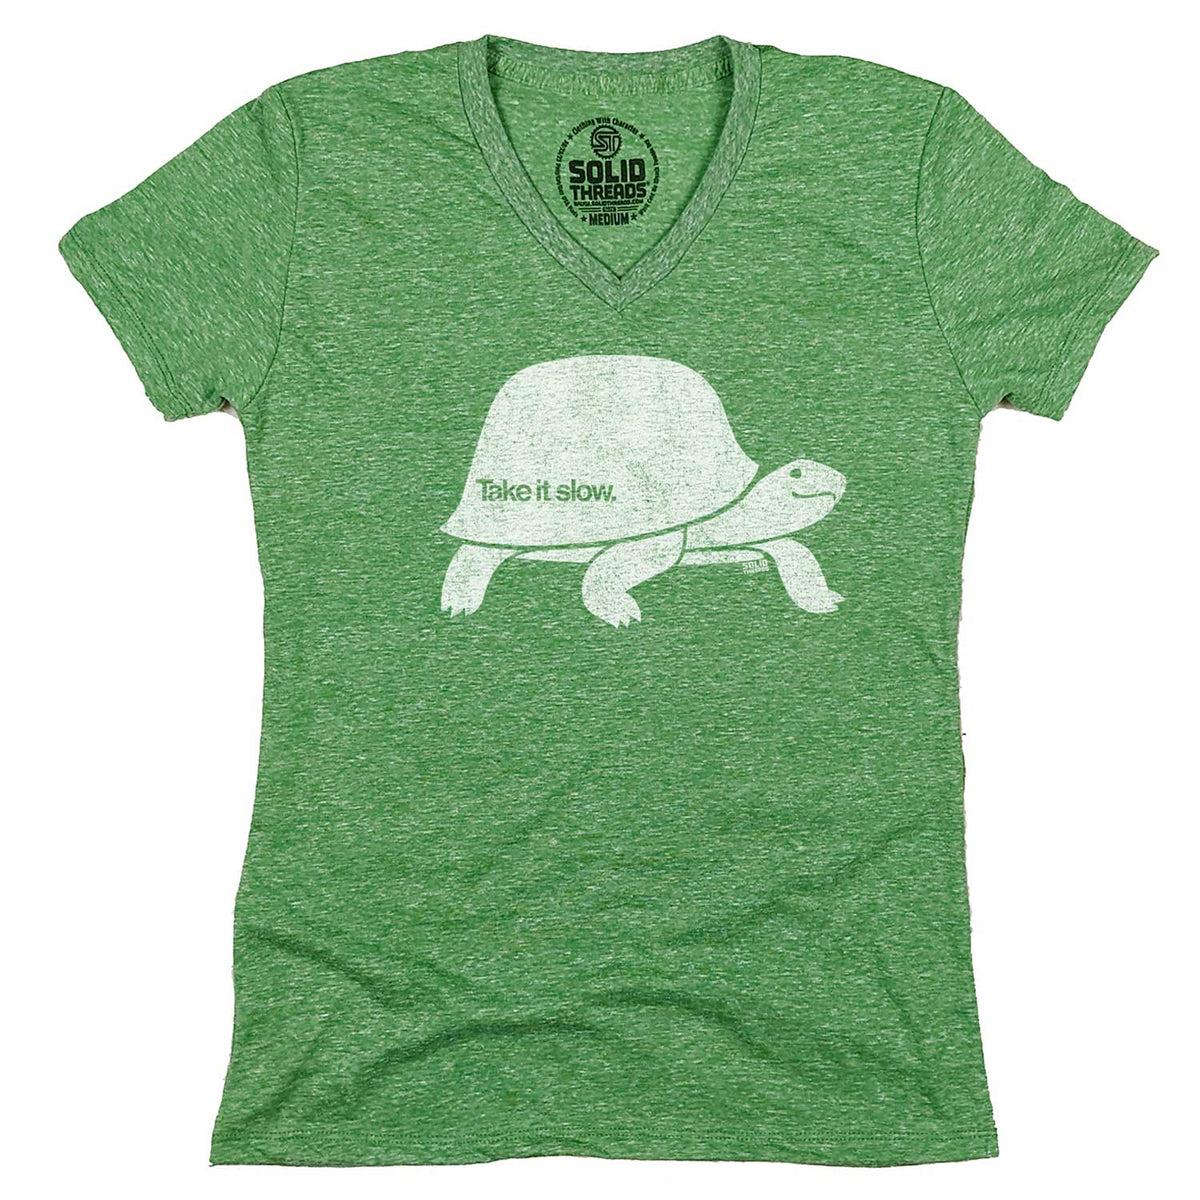 Women&#39;s Take it Slow Vintage Graphic V-Neck Tee | Funny Turtle T-shirt | Solid Threads